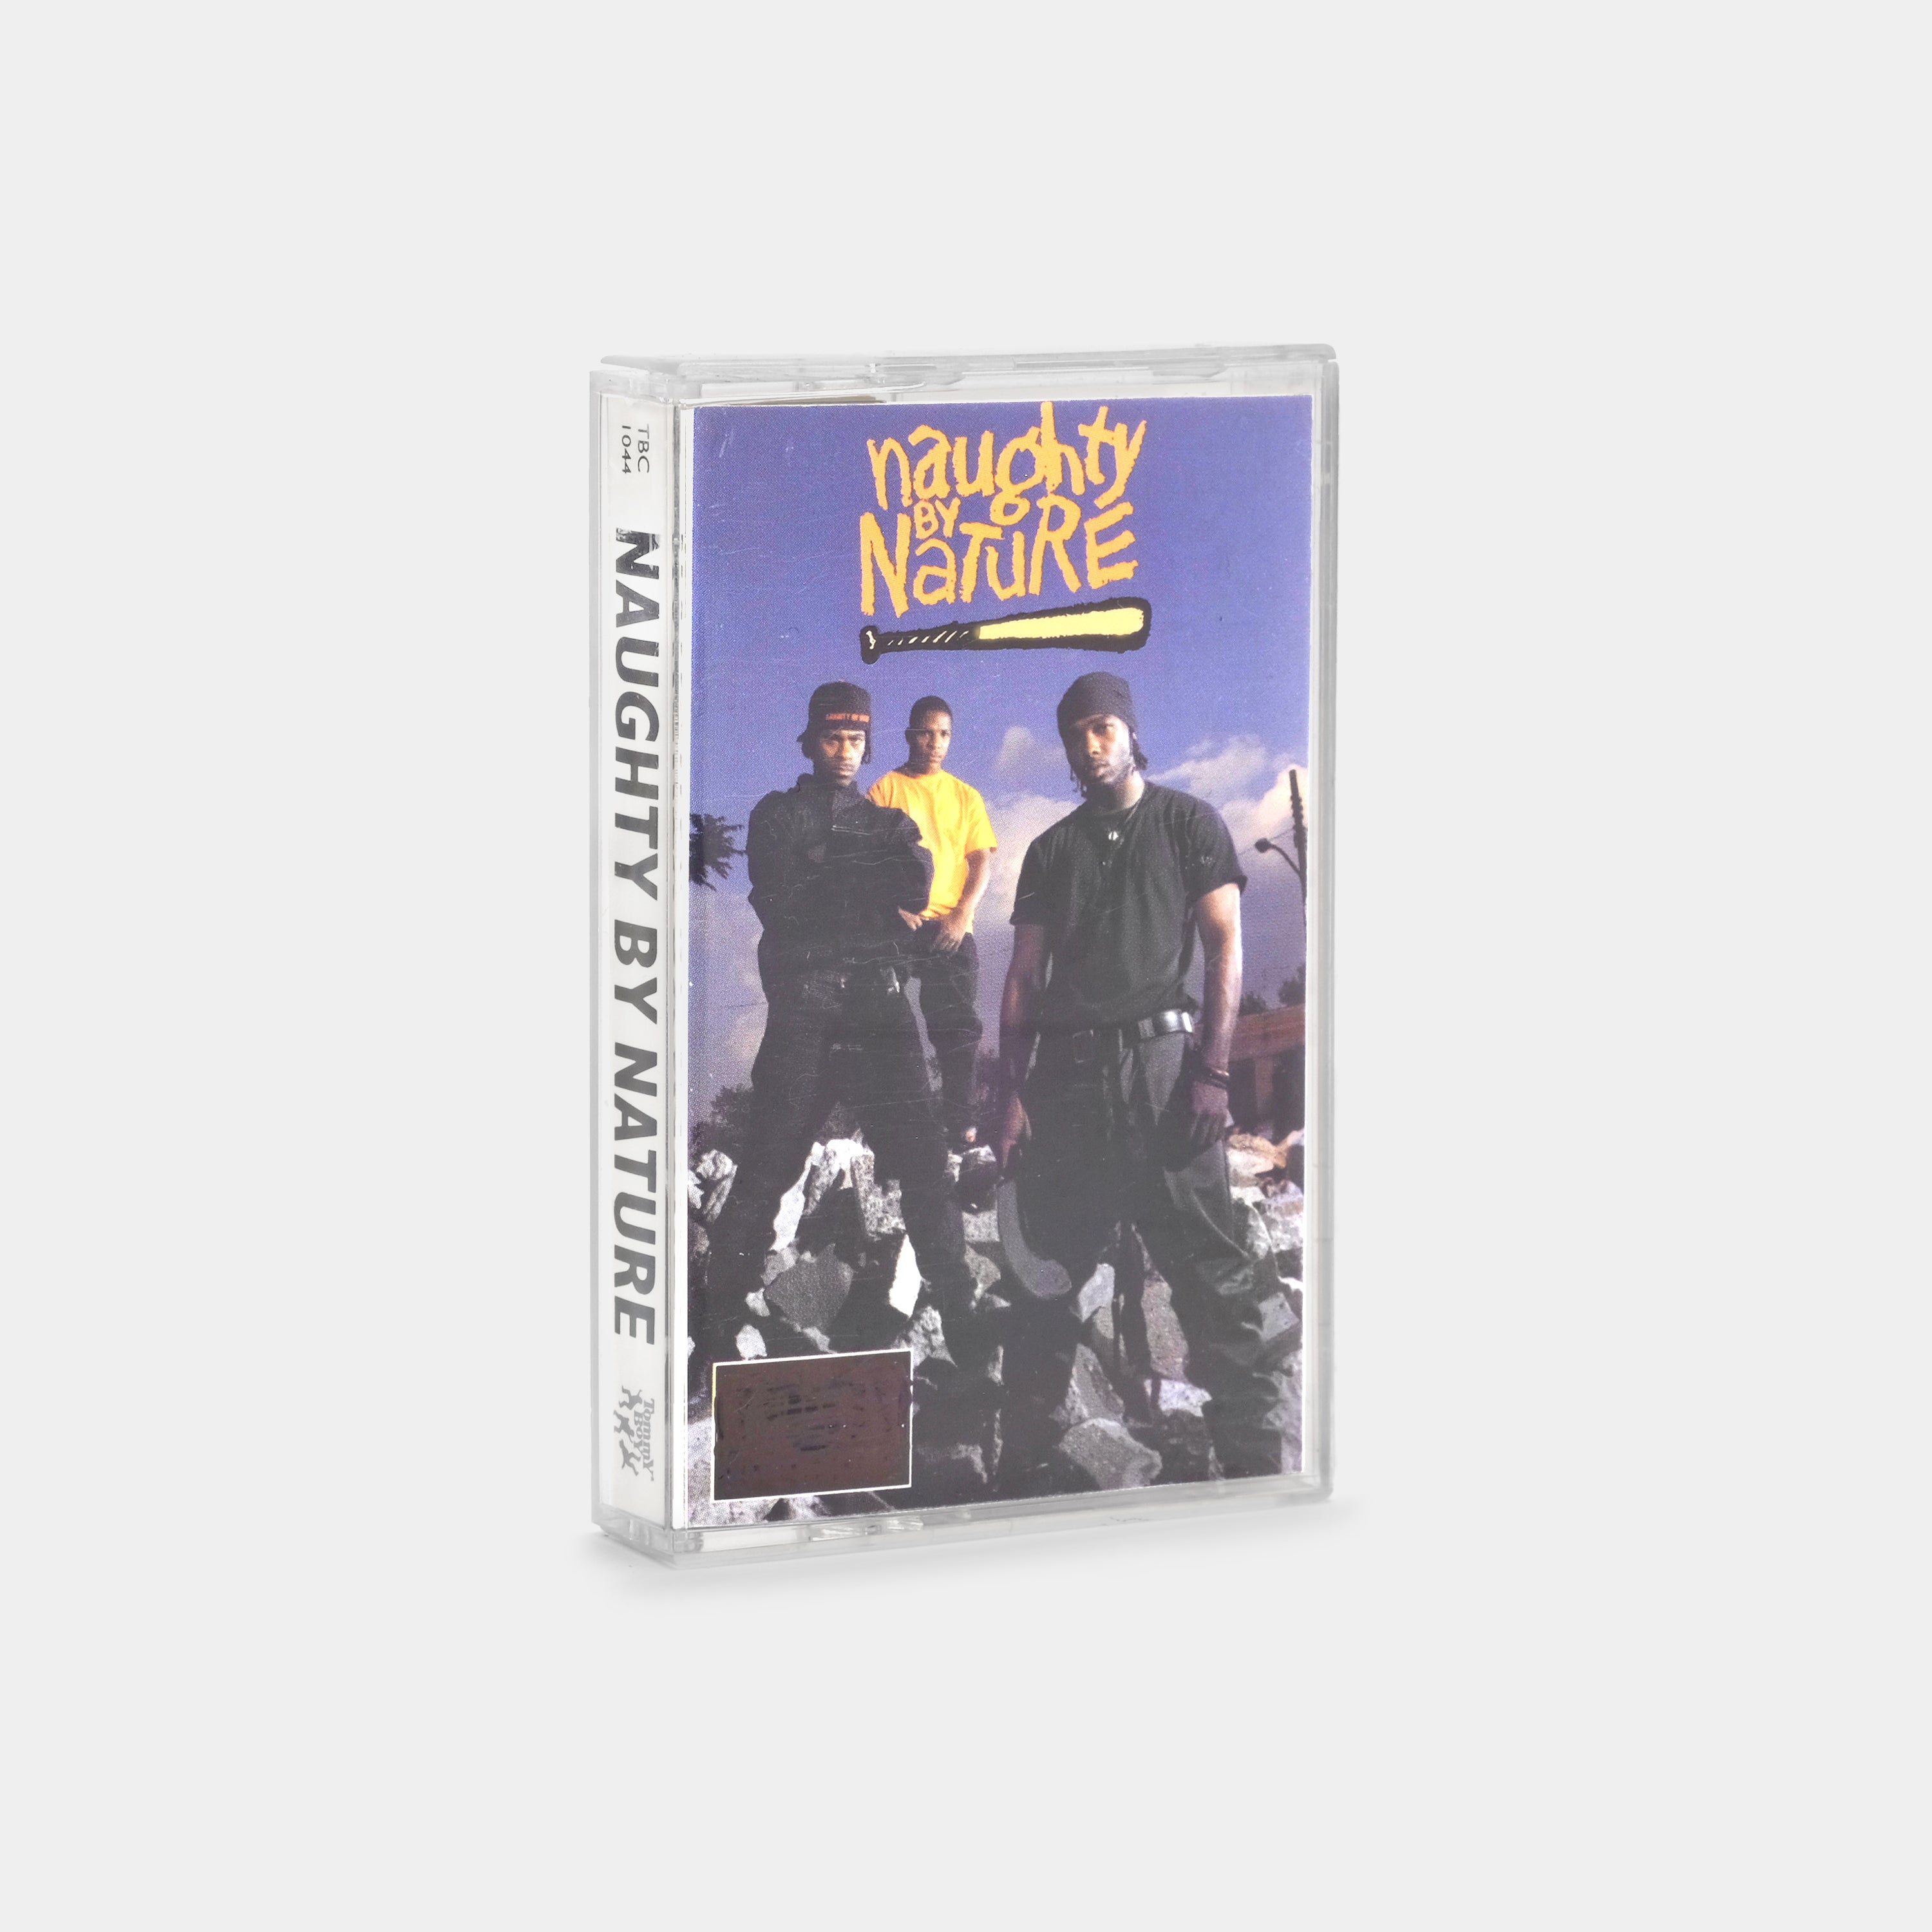 Naughty By Nature - Naughty By Nature Cassette Tape